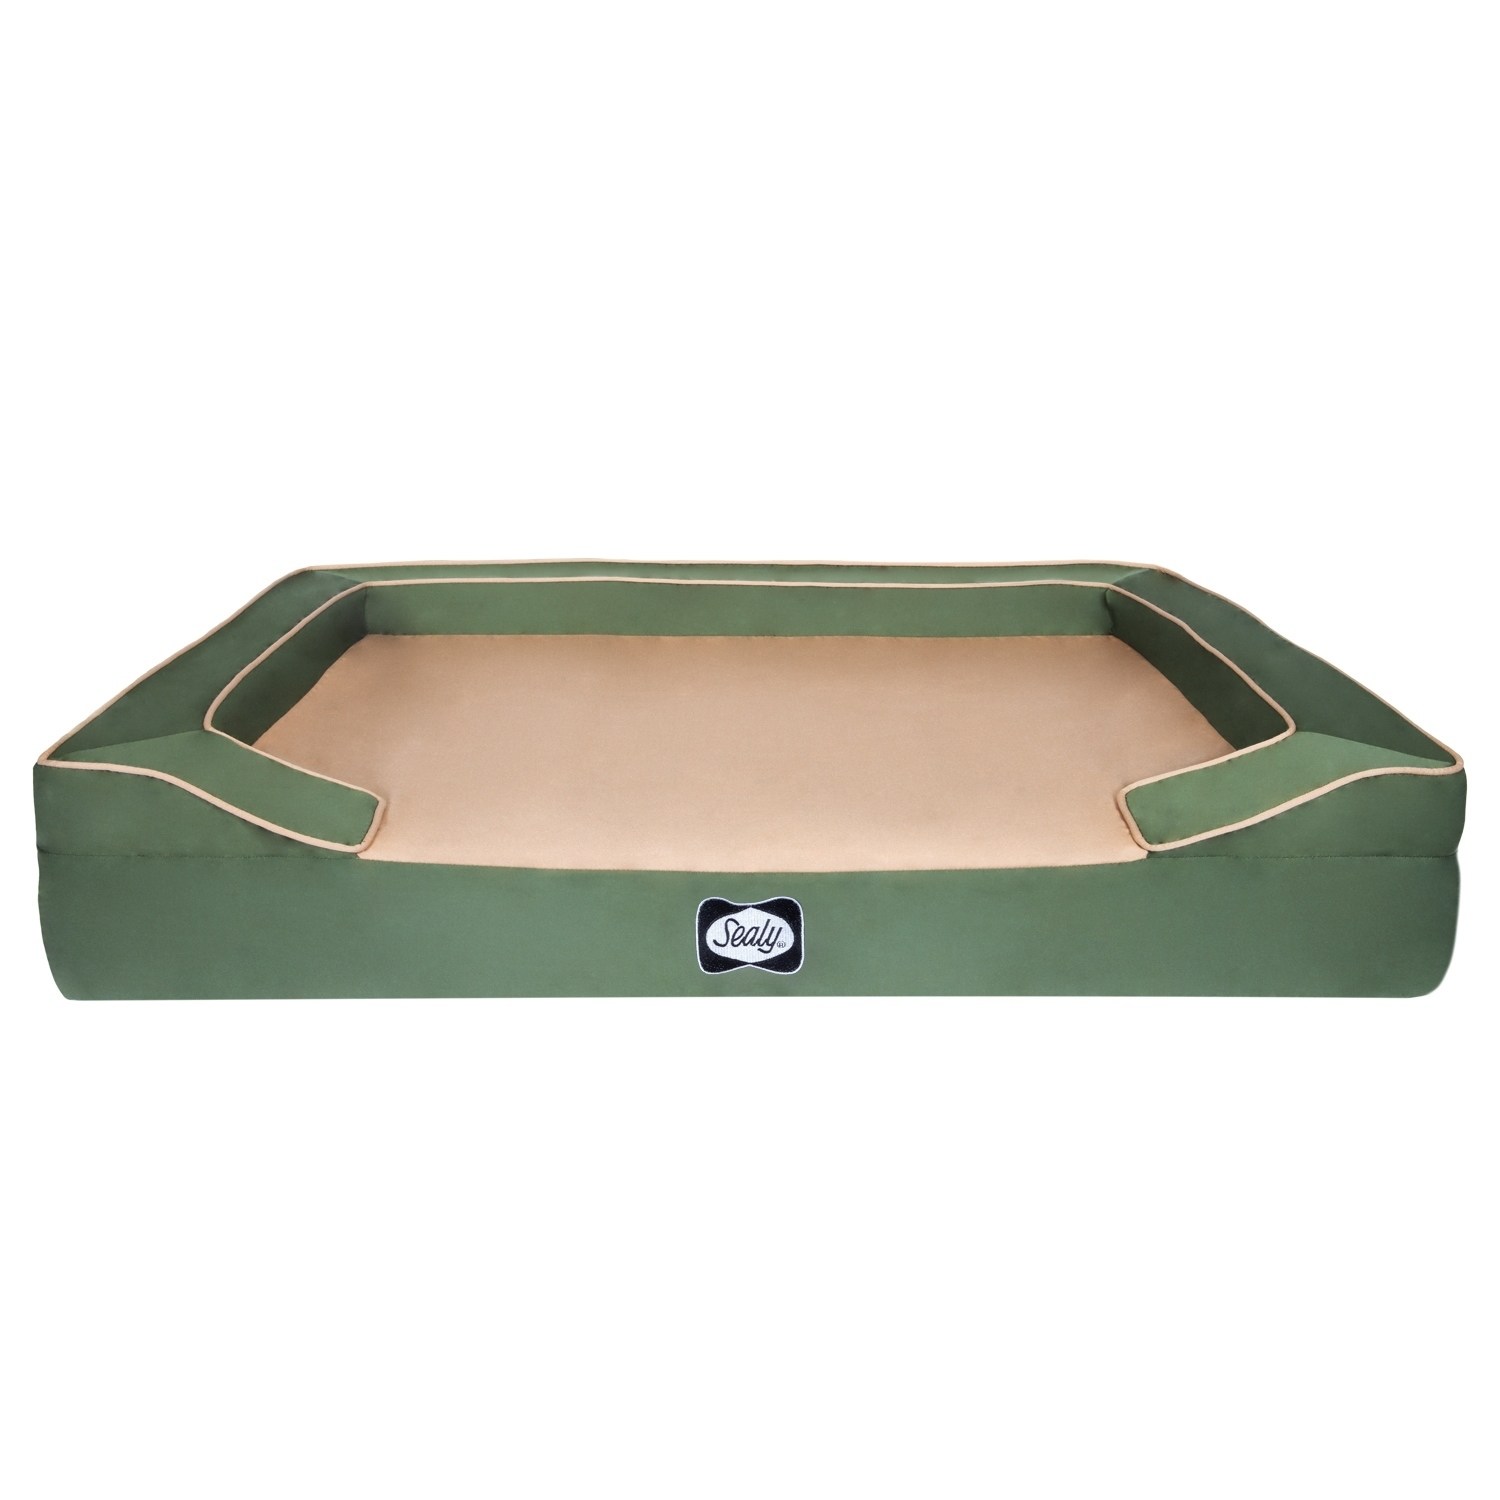 Sealy  Lux Elite Quad Element Orthopedic and Memory Foam Dog Bed - image 1 of 4